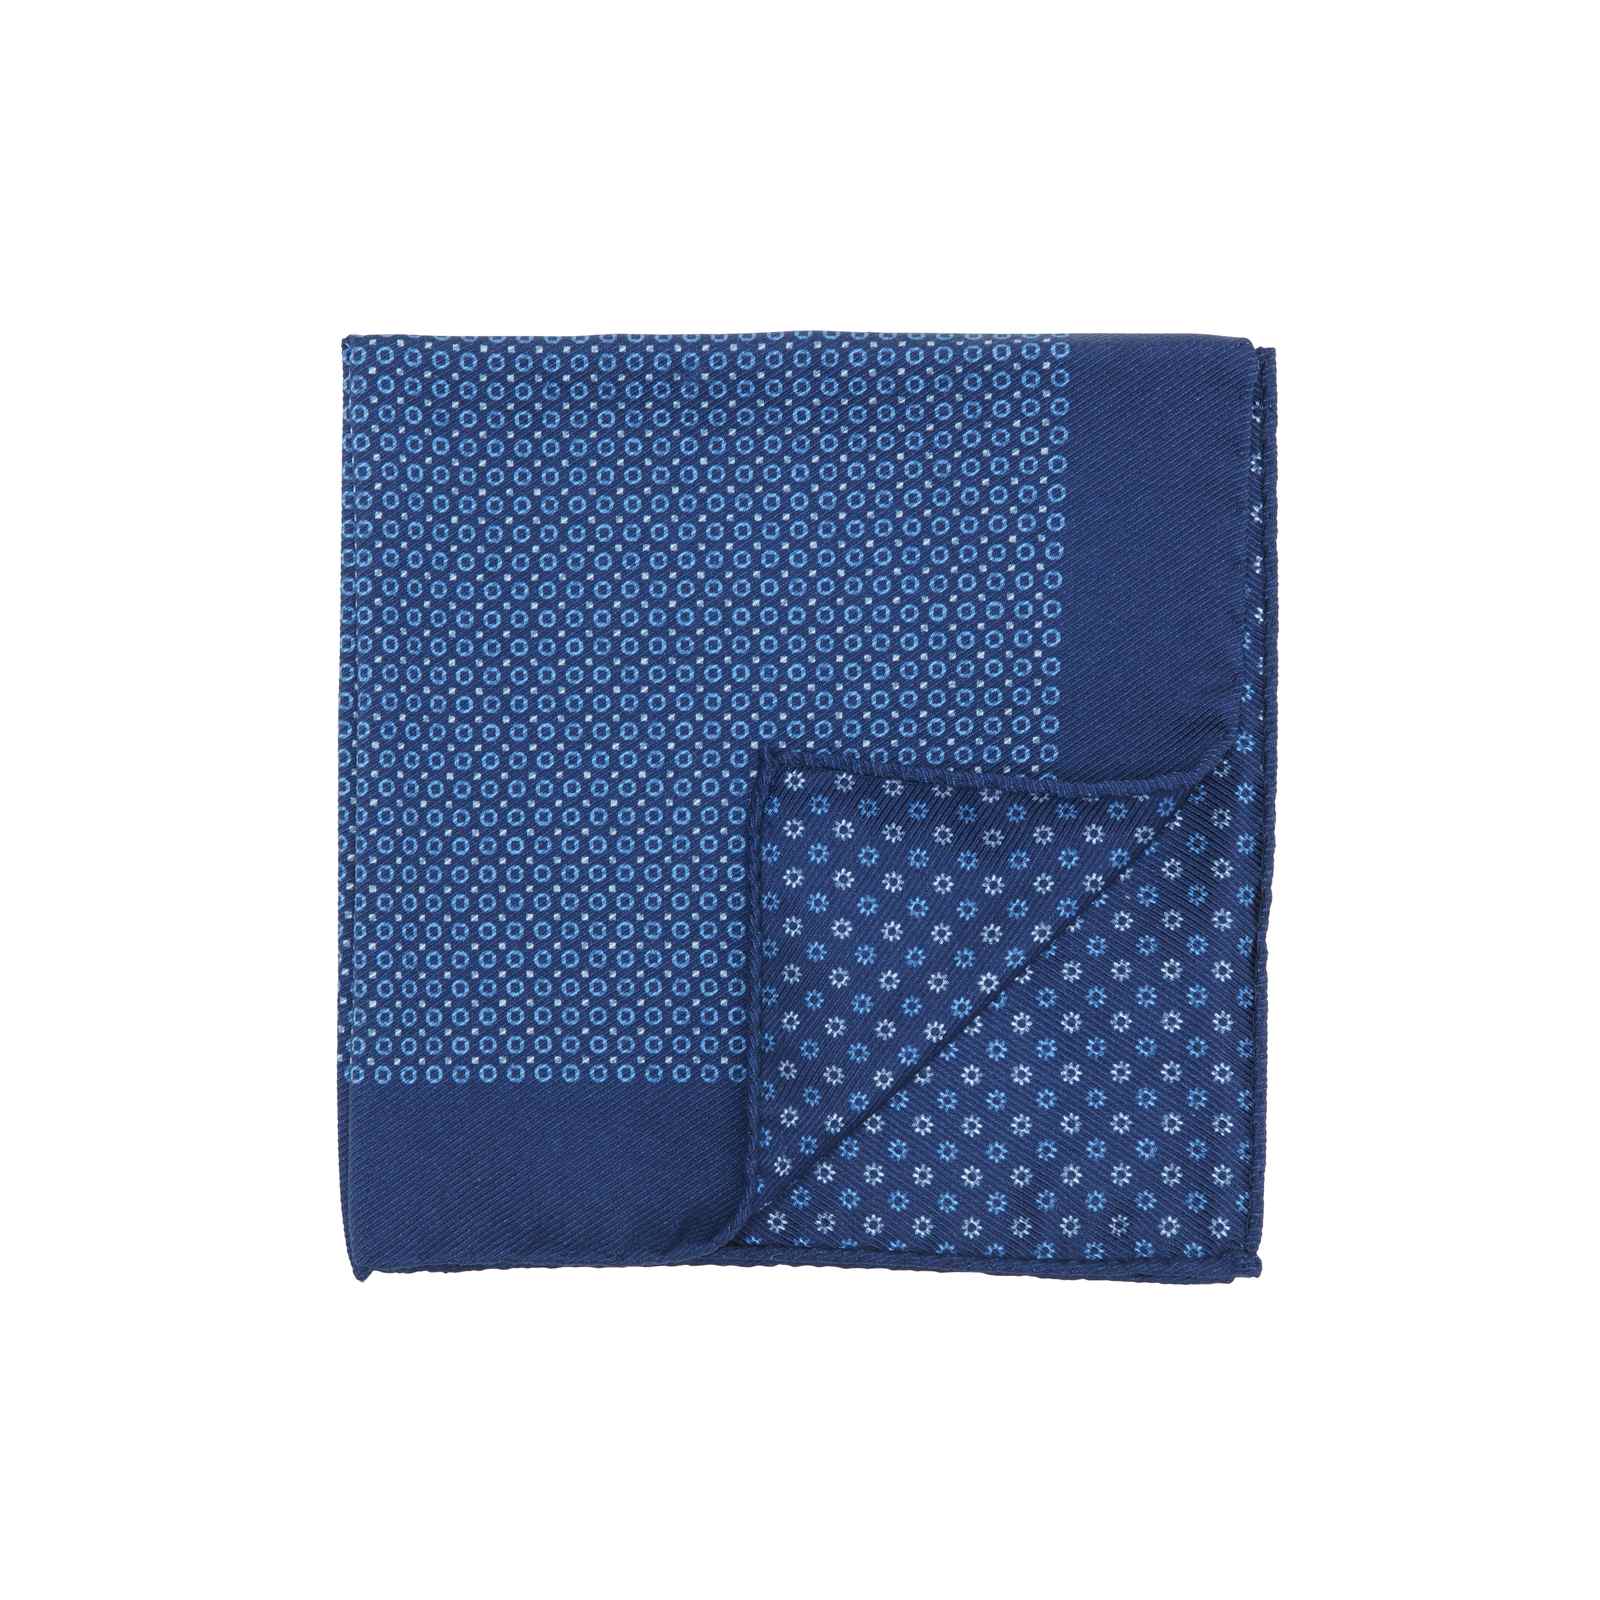 Navy Pocket Square with Small Light Blue Circles